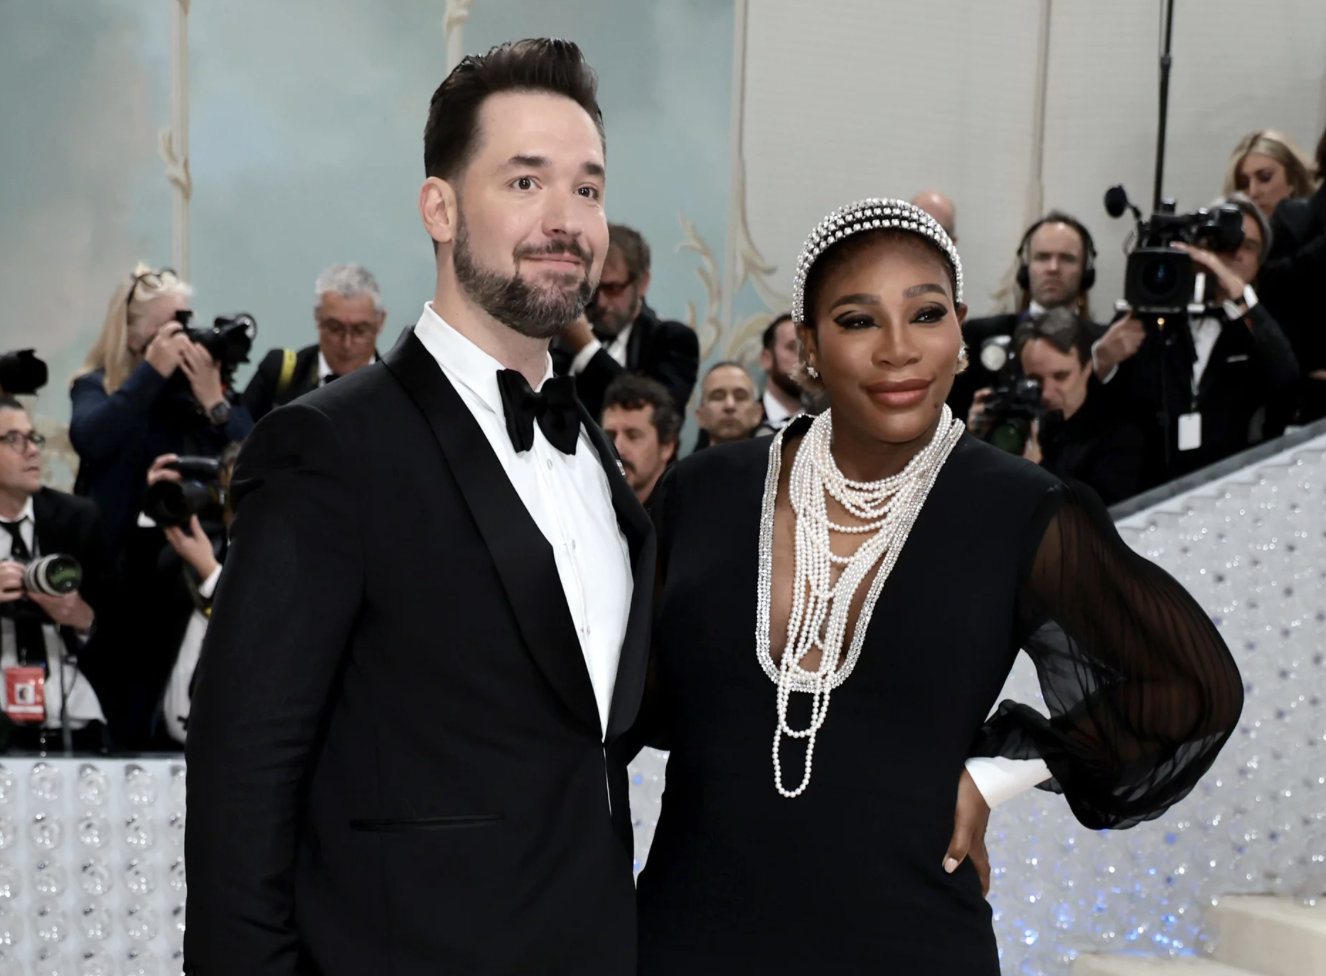 Serena Williams Reveals She and Husband Alexis Ohanian Are Expecting Their Second Child at 2023 Met Gala Red Carpet [Photos]